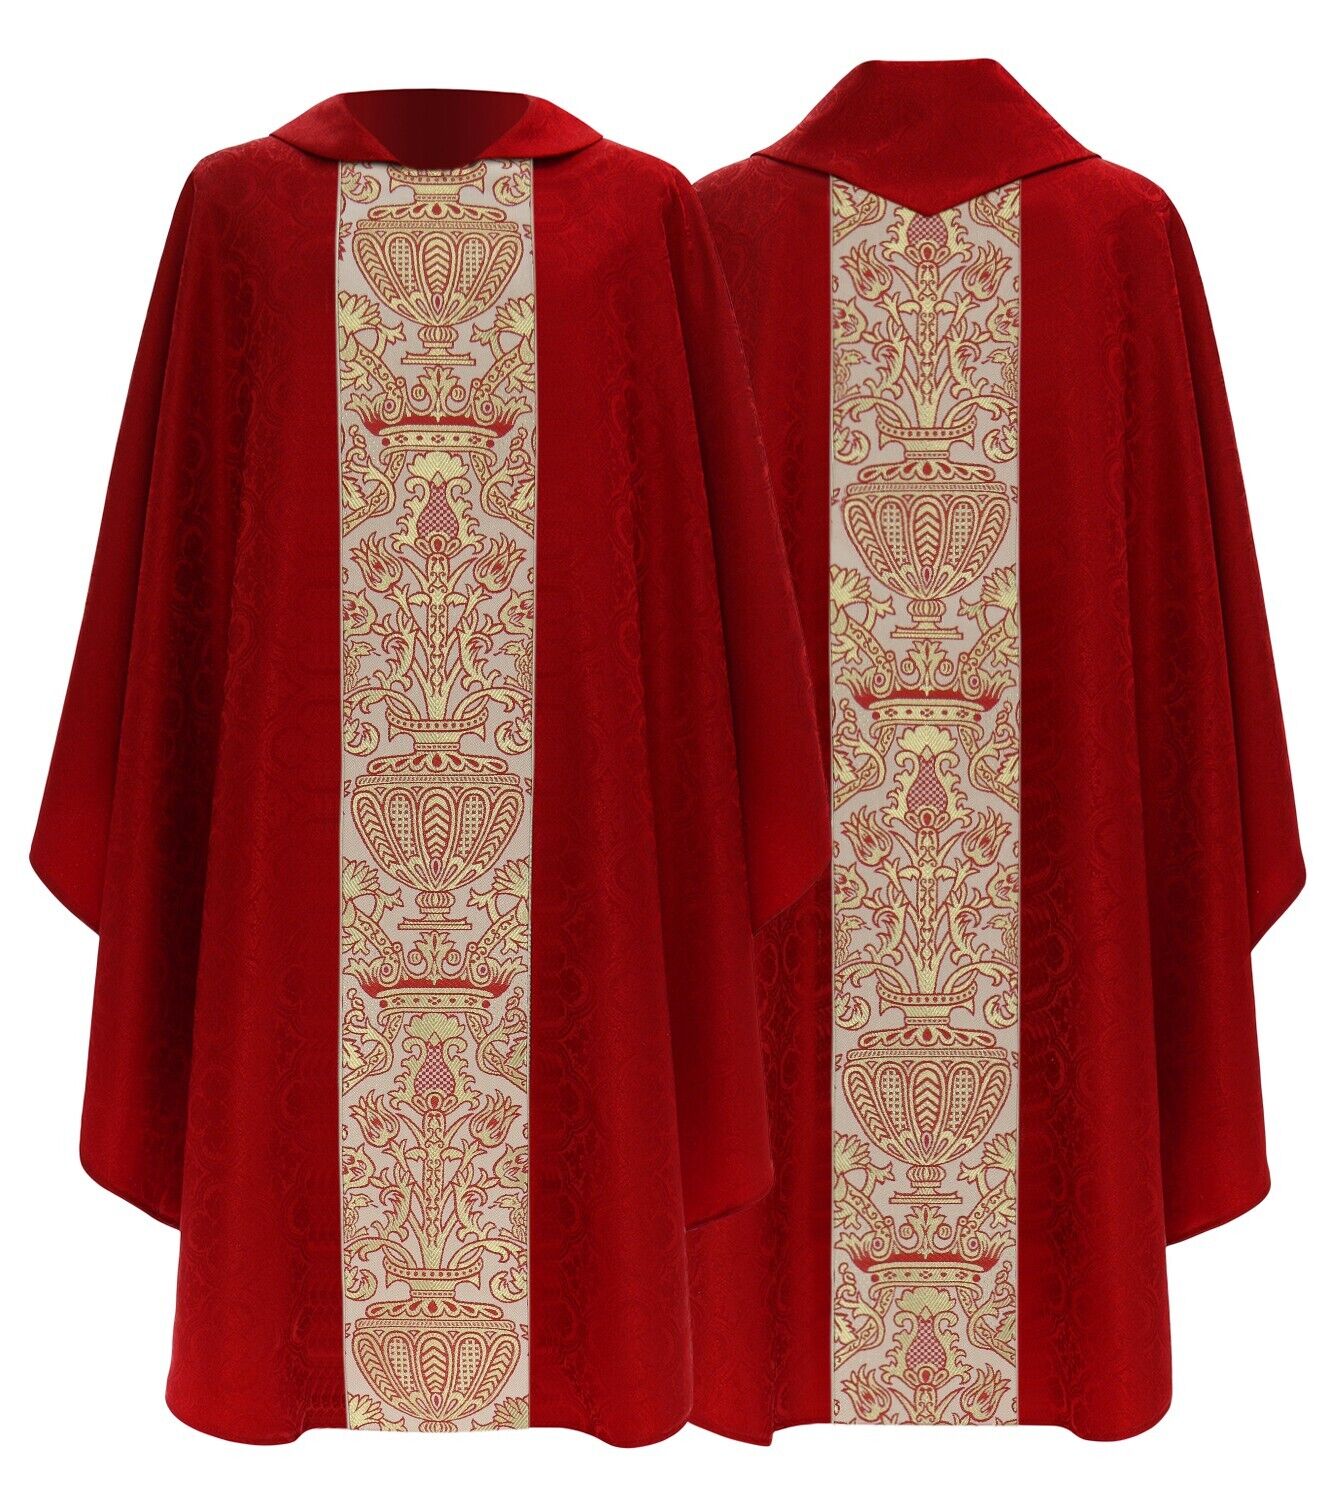 Red Gothic Chasuble with stole Coronation Tapestry Vestment Casulla Roja 076C25